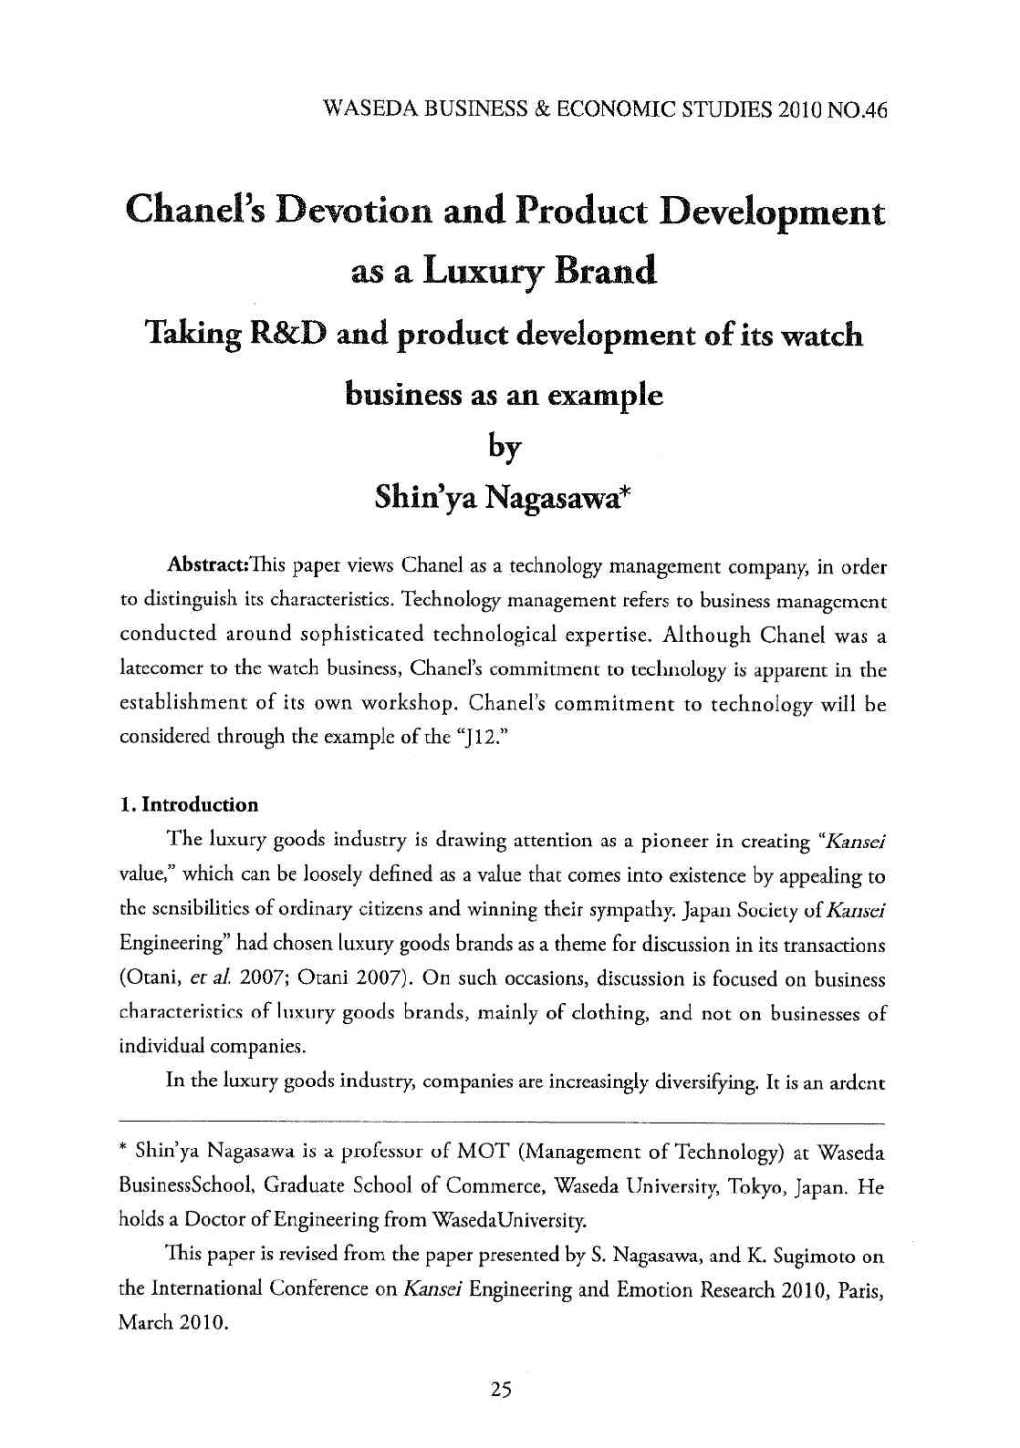 Chanel's Devotion and Product Development As a Luxury Brand Taking R&D and Product Development of Its Watch Business As an Example by Shin'ya Nagasawa*